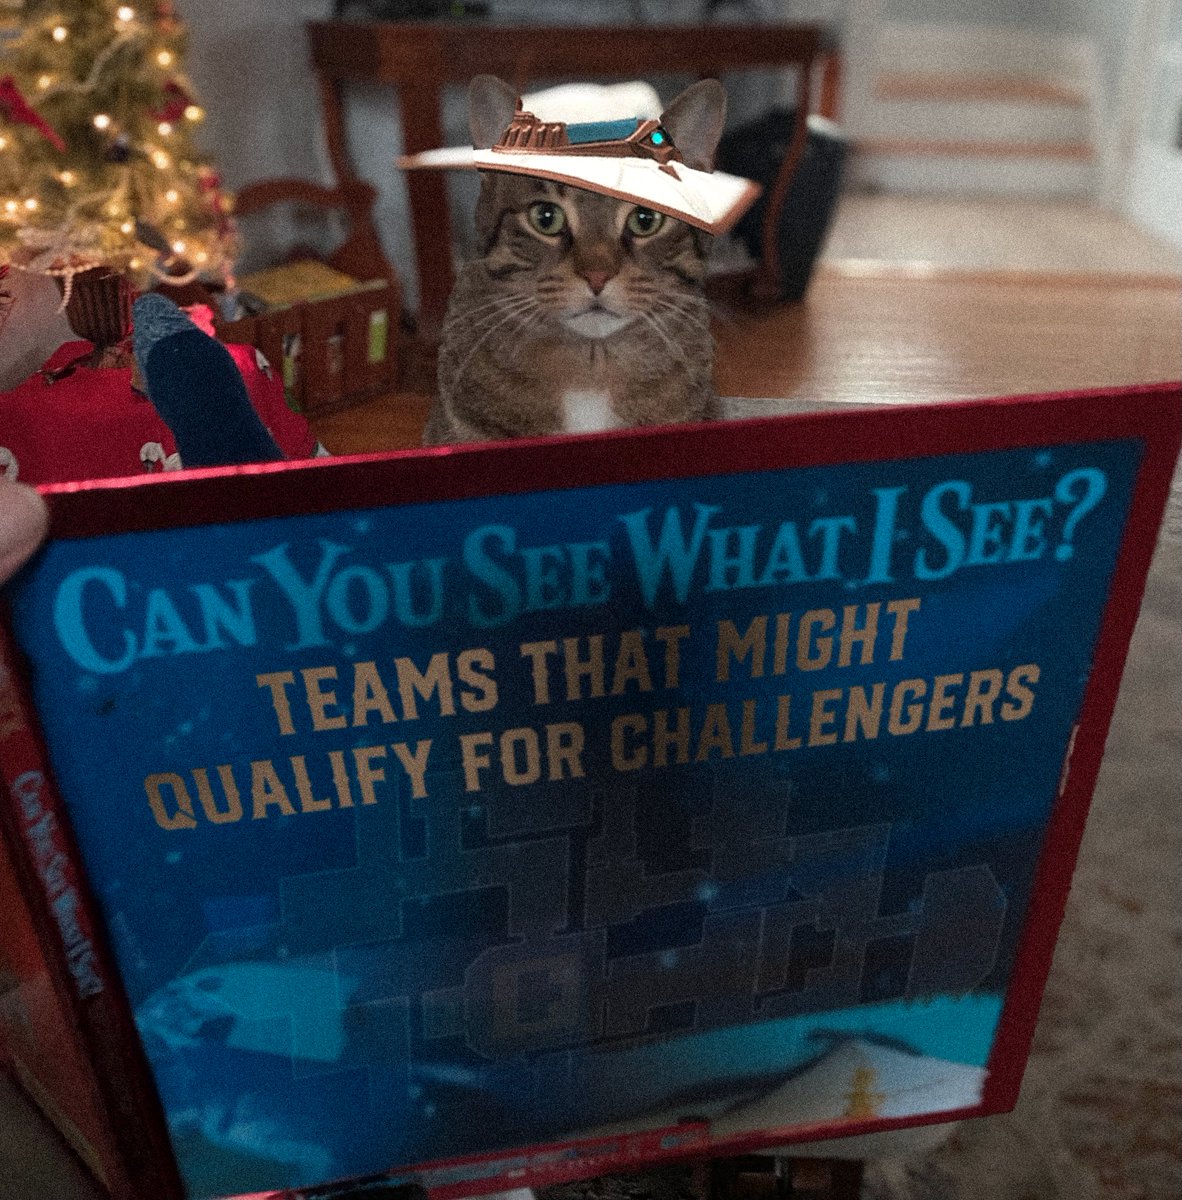 🐱 what teams do you think that cat sees in this book!? 👀